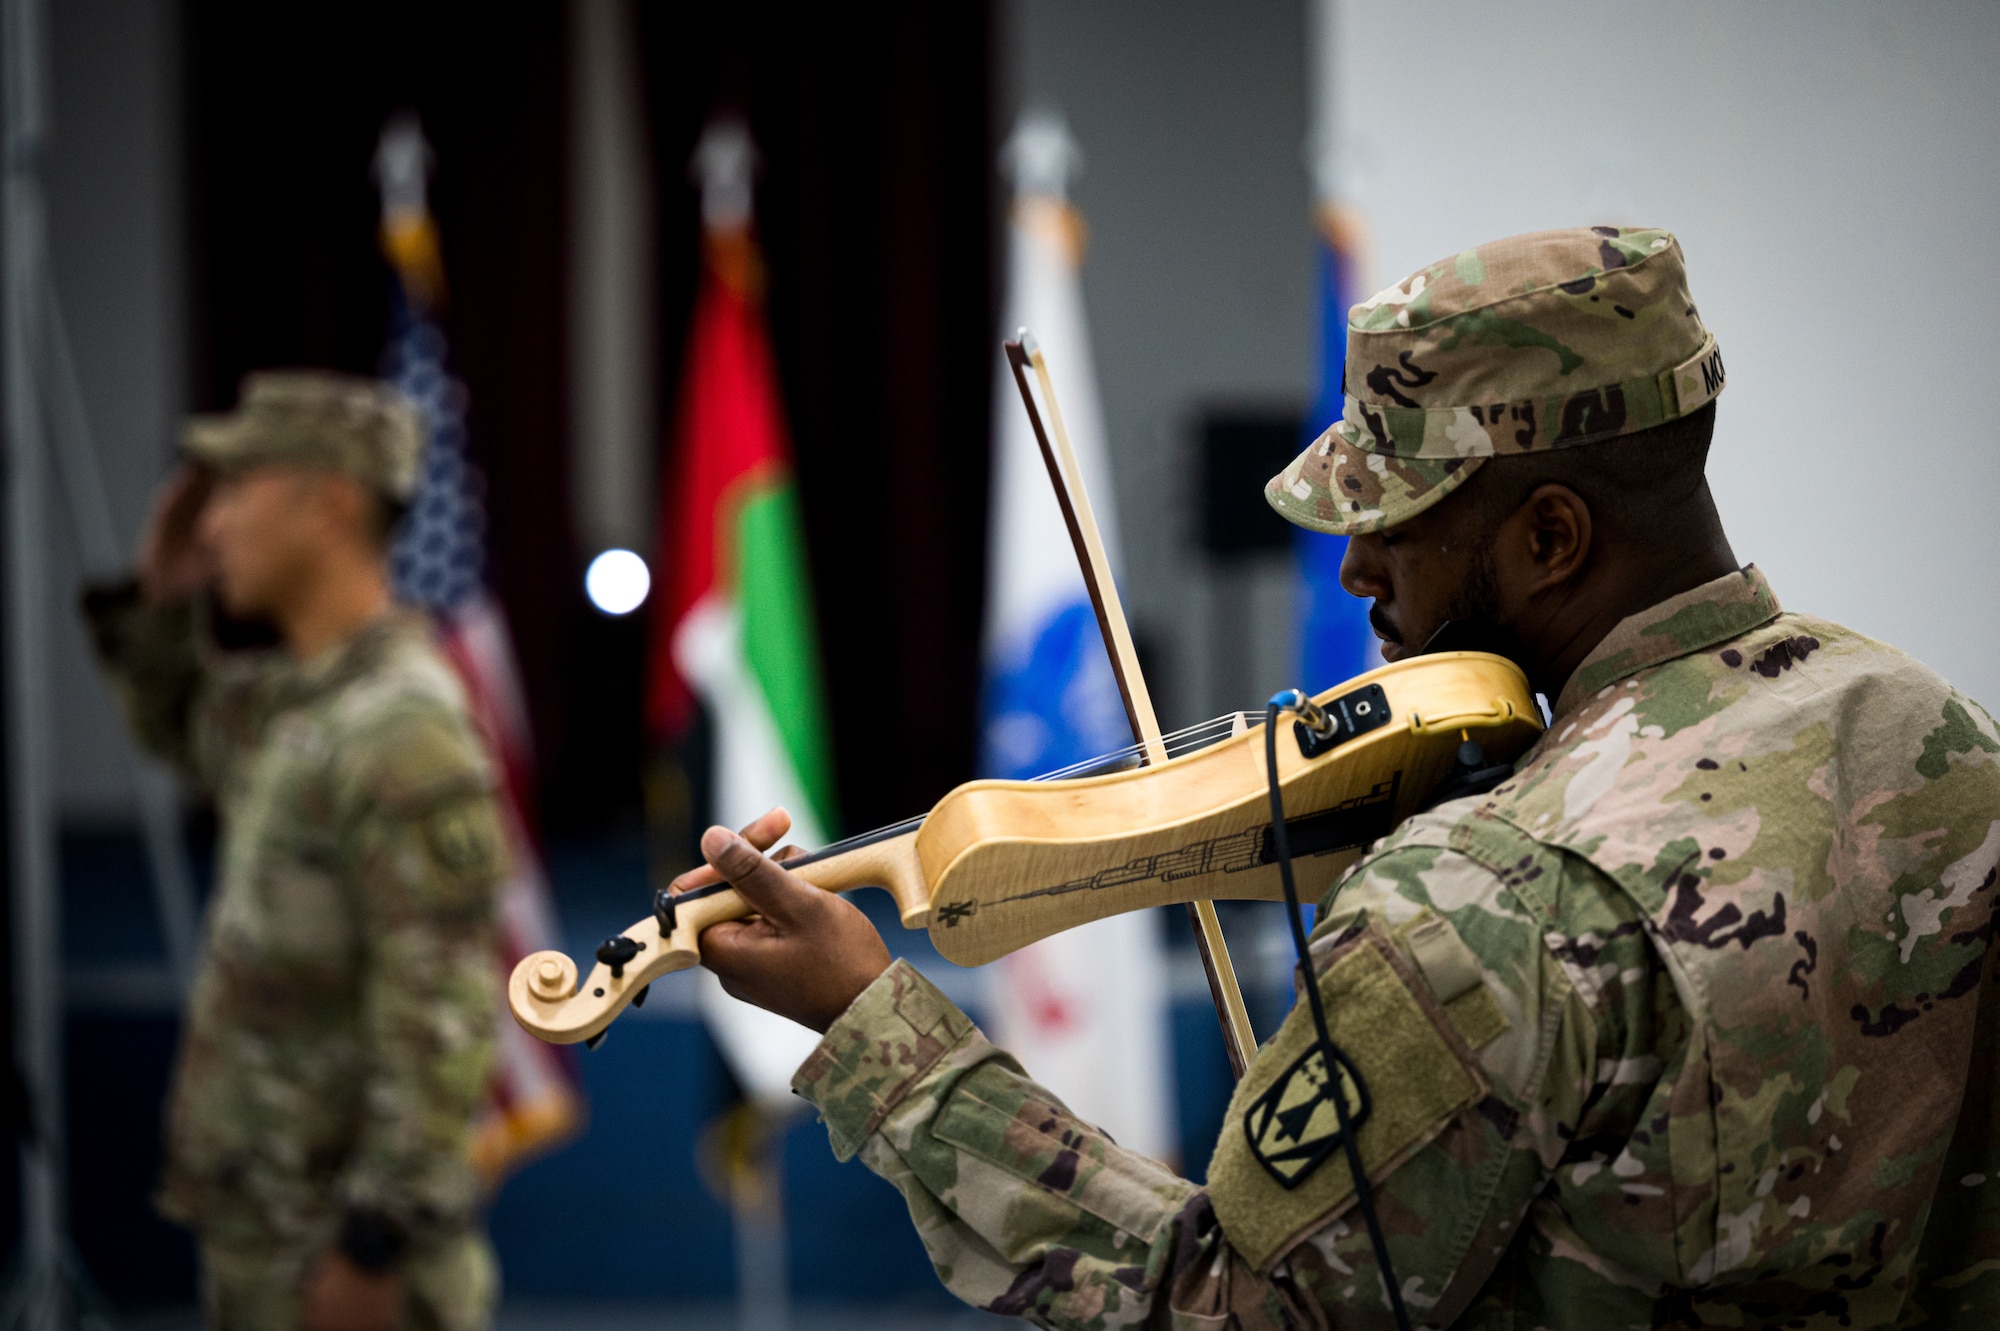 U.S. Army Sgt. 1st Class Myles Moore, assigned to the 4th Battalion 3rd Air Defense Artillery Regiment (4-3 ADA), performs the U.S. National Anthem on the violin during the 4-3 ADA transfer of authority ceremony, Jan. 26, 2023. The 4-3 ADA transferred responsibility of the MIM-104 Patriot missile systems at Al Dhafra AB to the 2nd Battalion 43rd Air Defense Artillery Regiment before returning to garrison at Ft. Sill, Oklahoma.